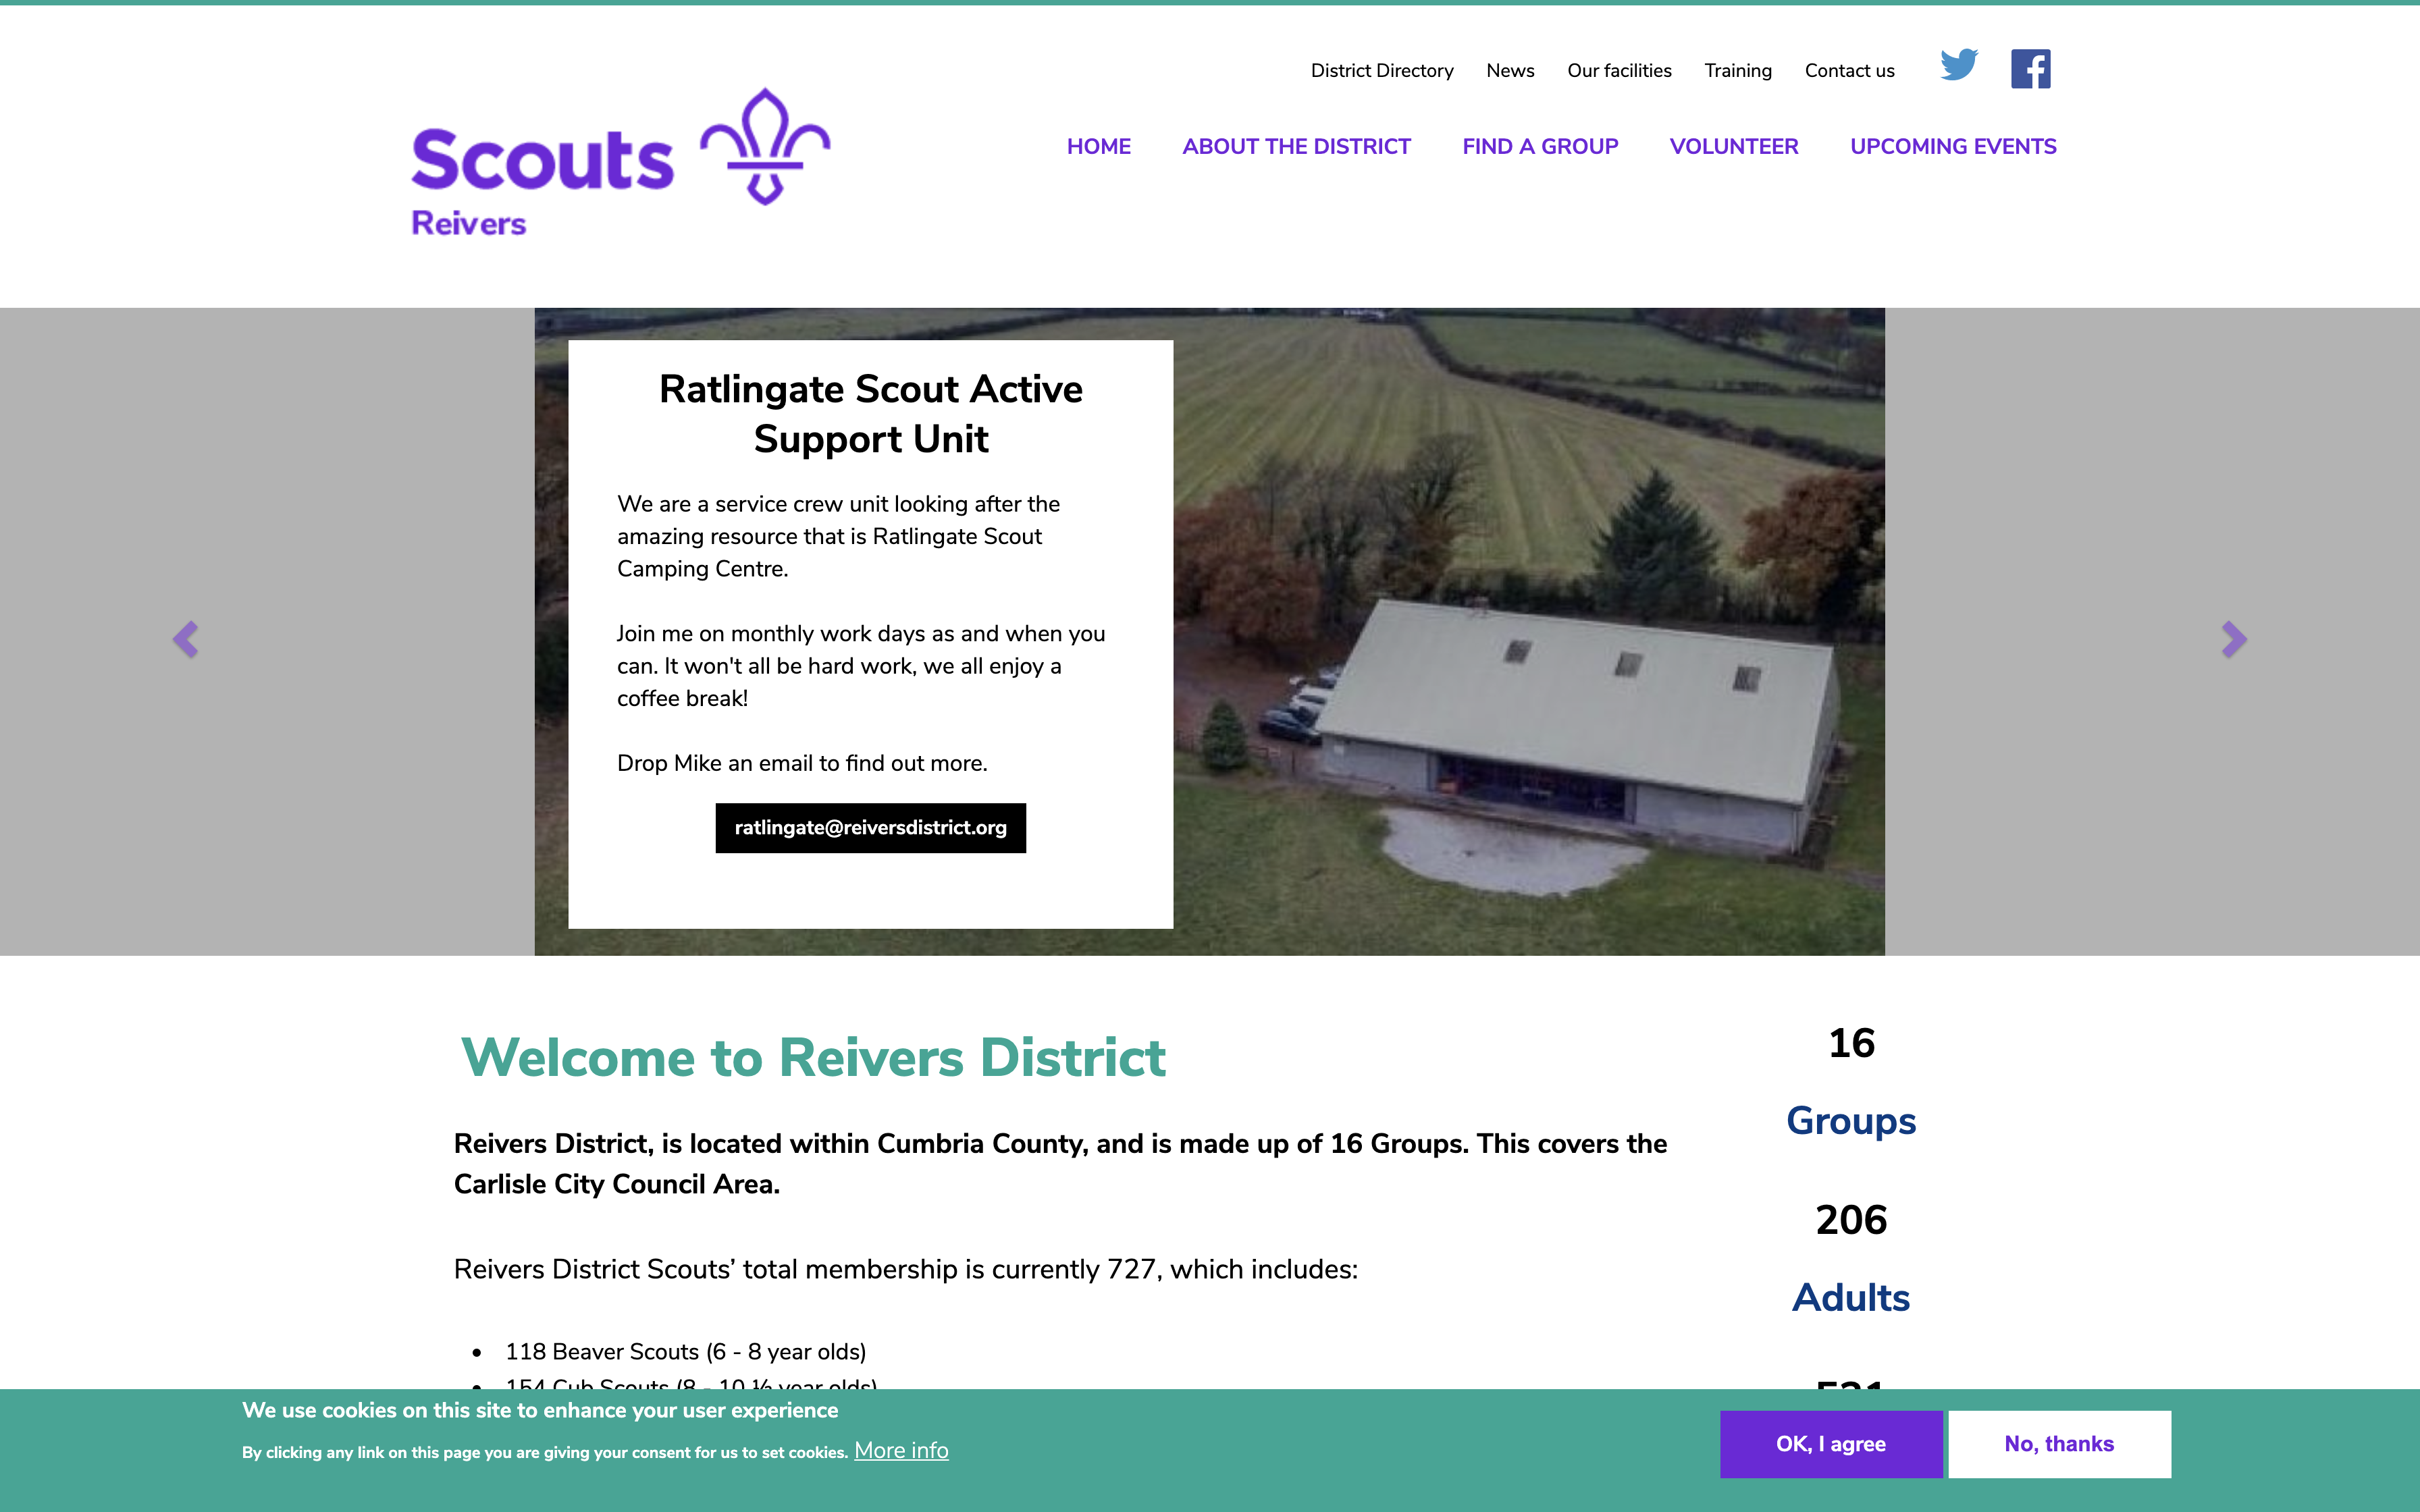 Reivers District Scouts